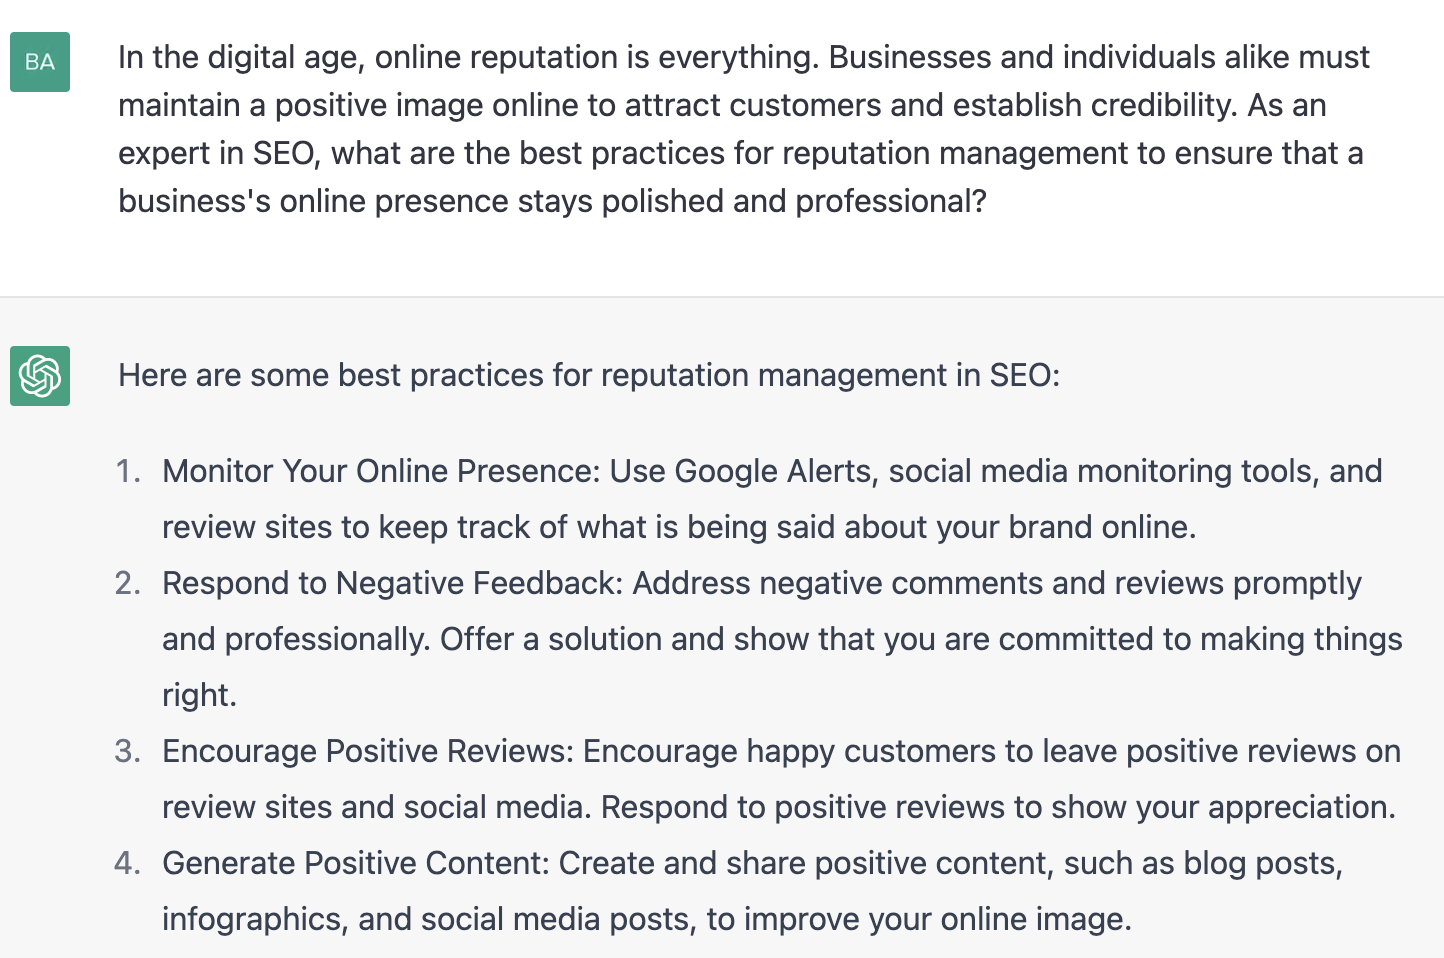 ChatGPT prompt about the best practices for reputation management in SEO